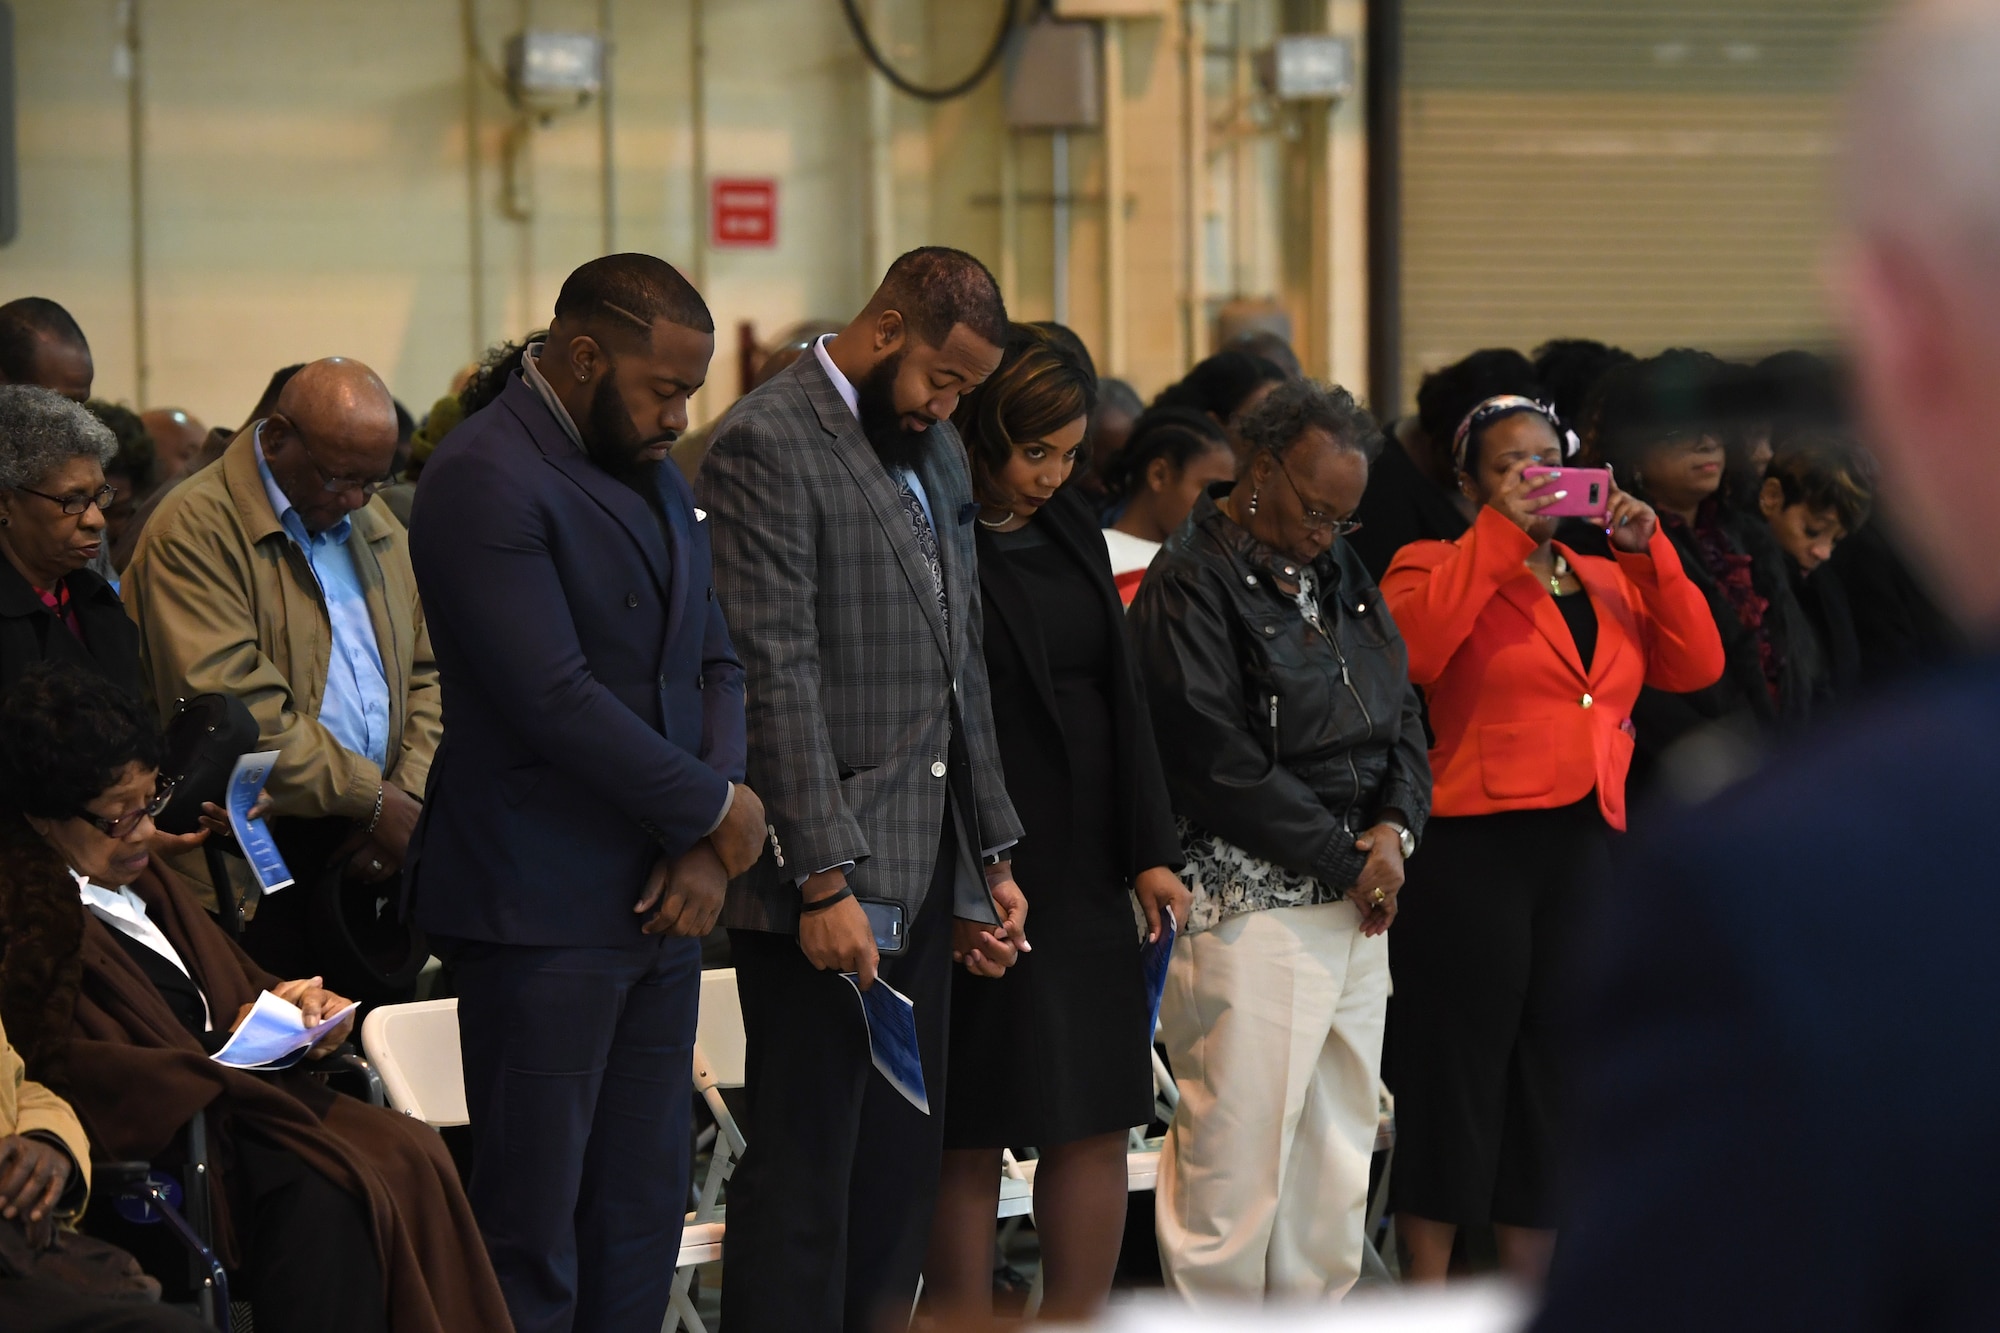 Family and friends bow their heads as U.S. Air Force Lt. Col. Jeffrey Kidd, 145th Airlift Wing Chaplain, delivers the benediction during Brig. Gen. Clarence Ervin’s retirement ceremony at the North Carolina Air National Guard Base (NCANG), Charlotte Douglas International Airport, Feb. 09, 2019. Family, friends and guard members gathered to celebrate the retirement of Gen. Ervin, Chief of Staff for the NCANG, after serving in the military for 37 years.